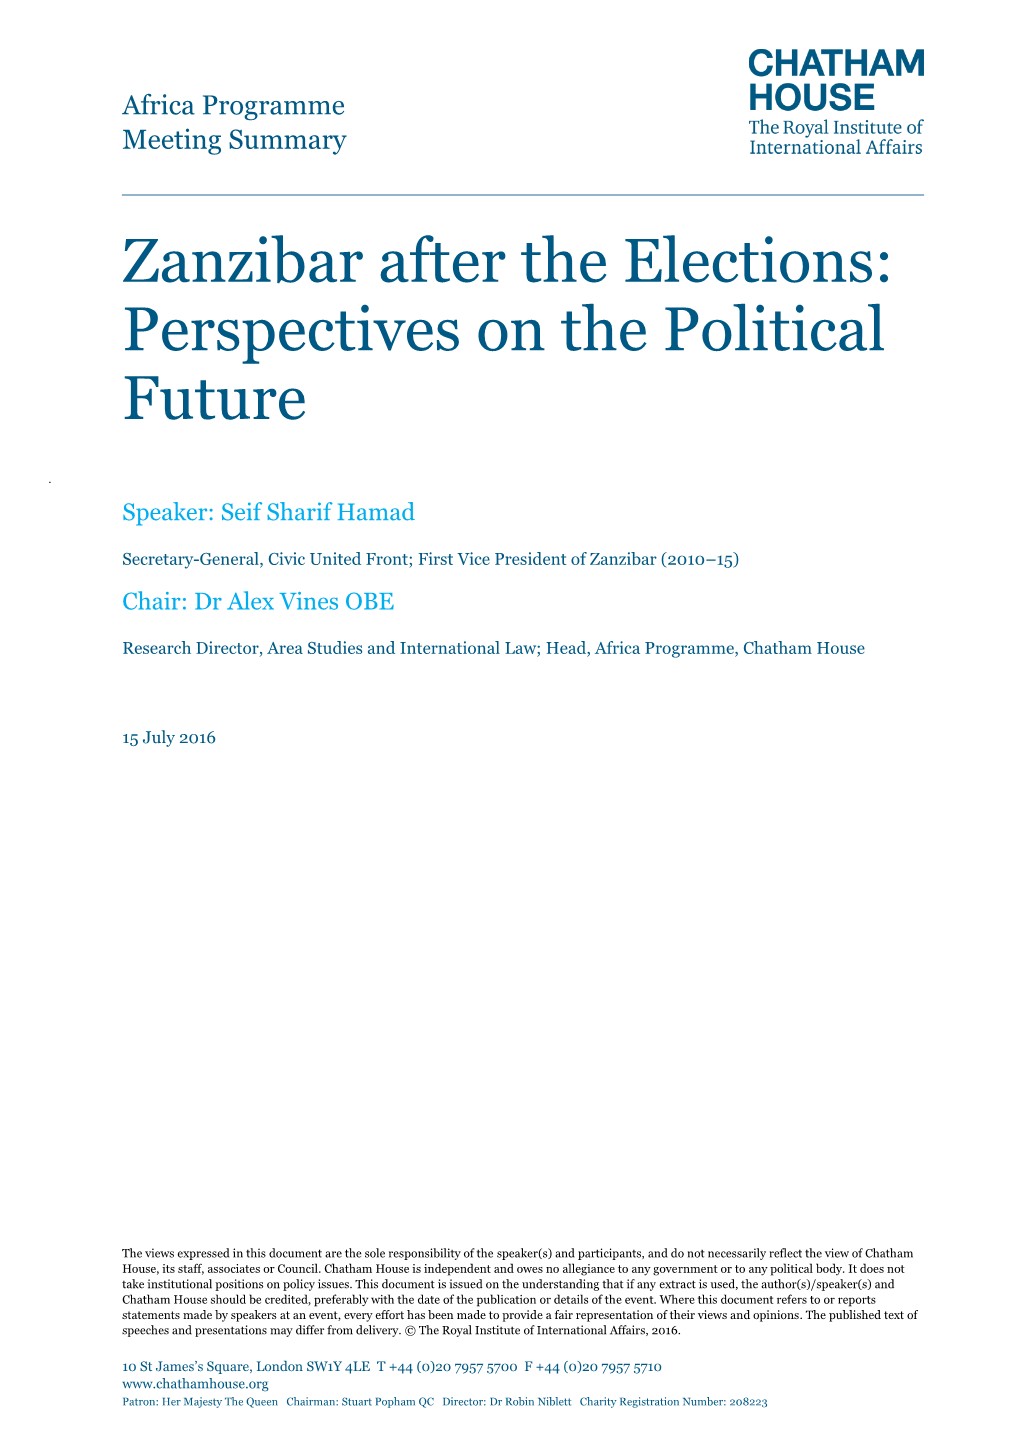 Zanzibar After the Elections: Perspectives on the Political Future